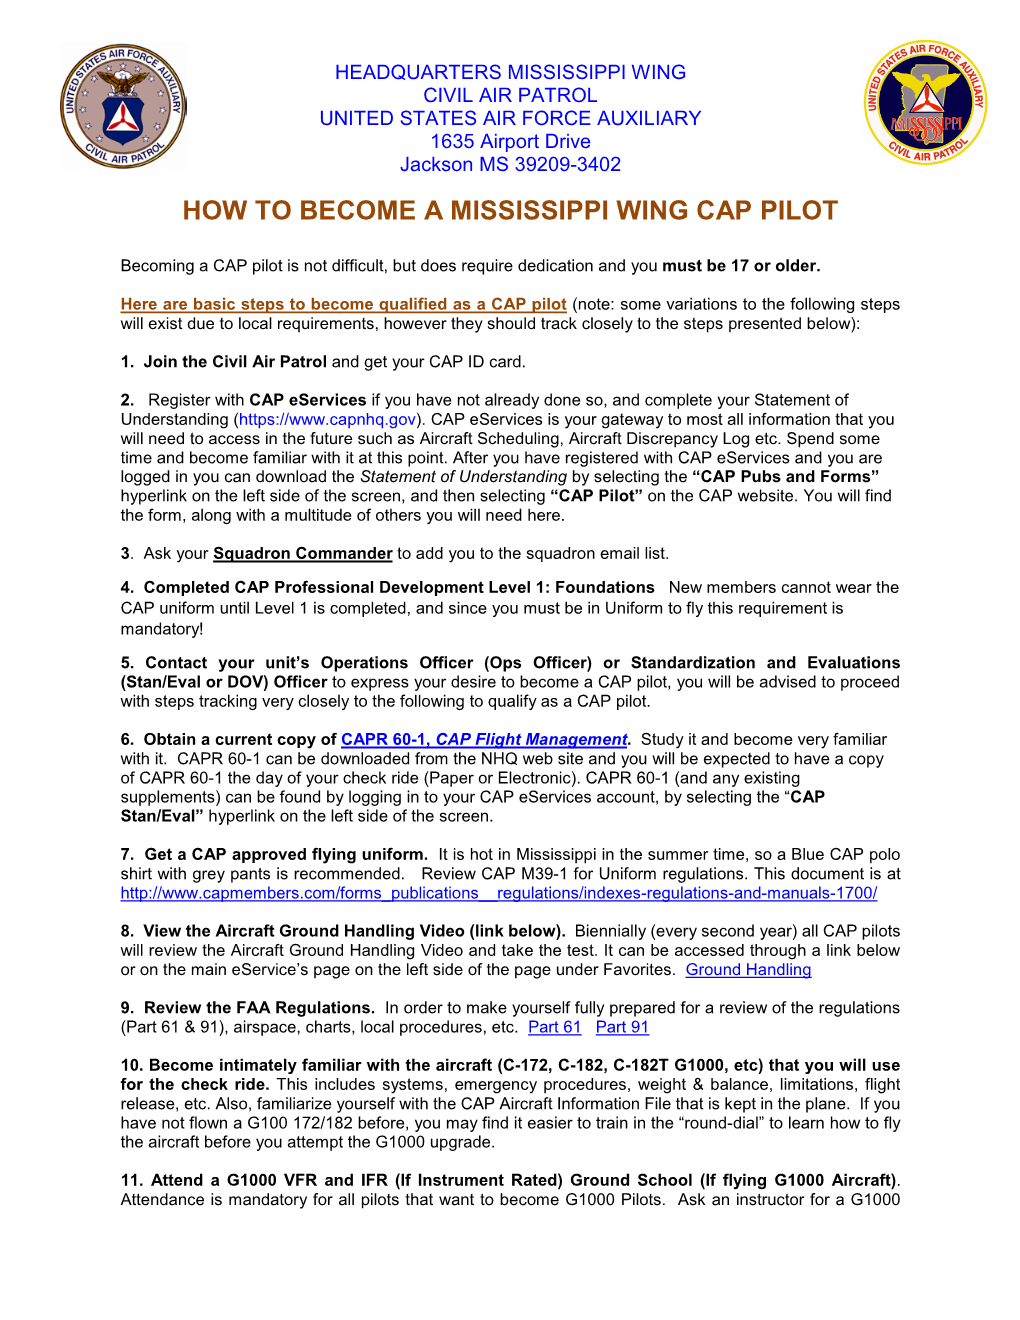 How to Become a Mississippi Wing Cap Pilot